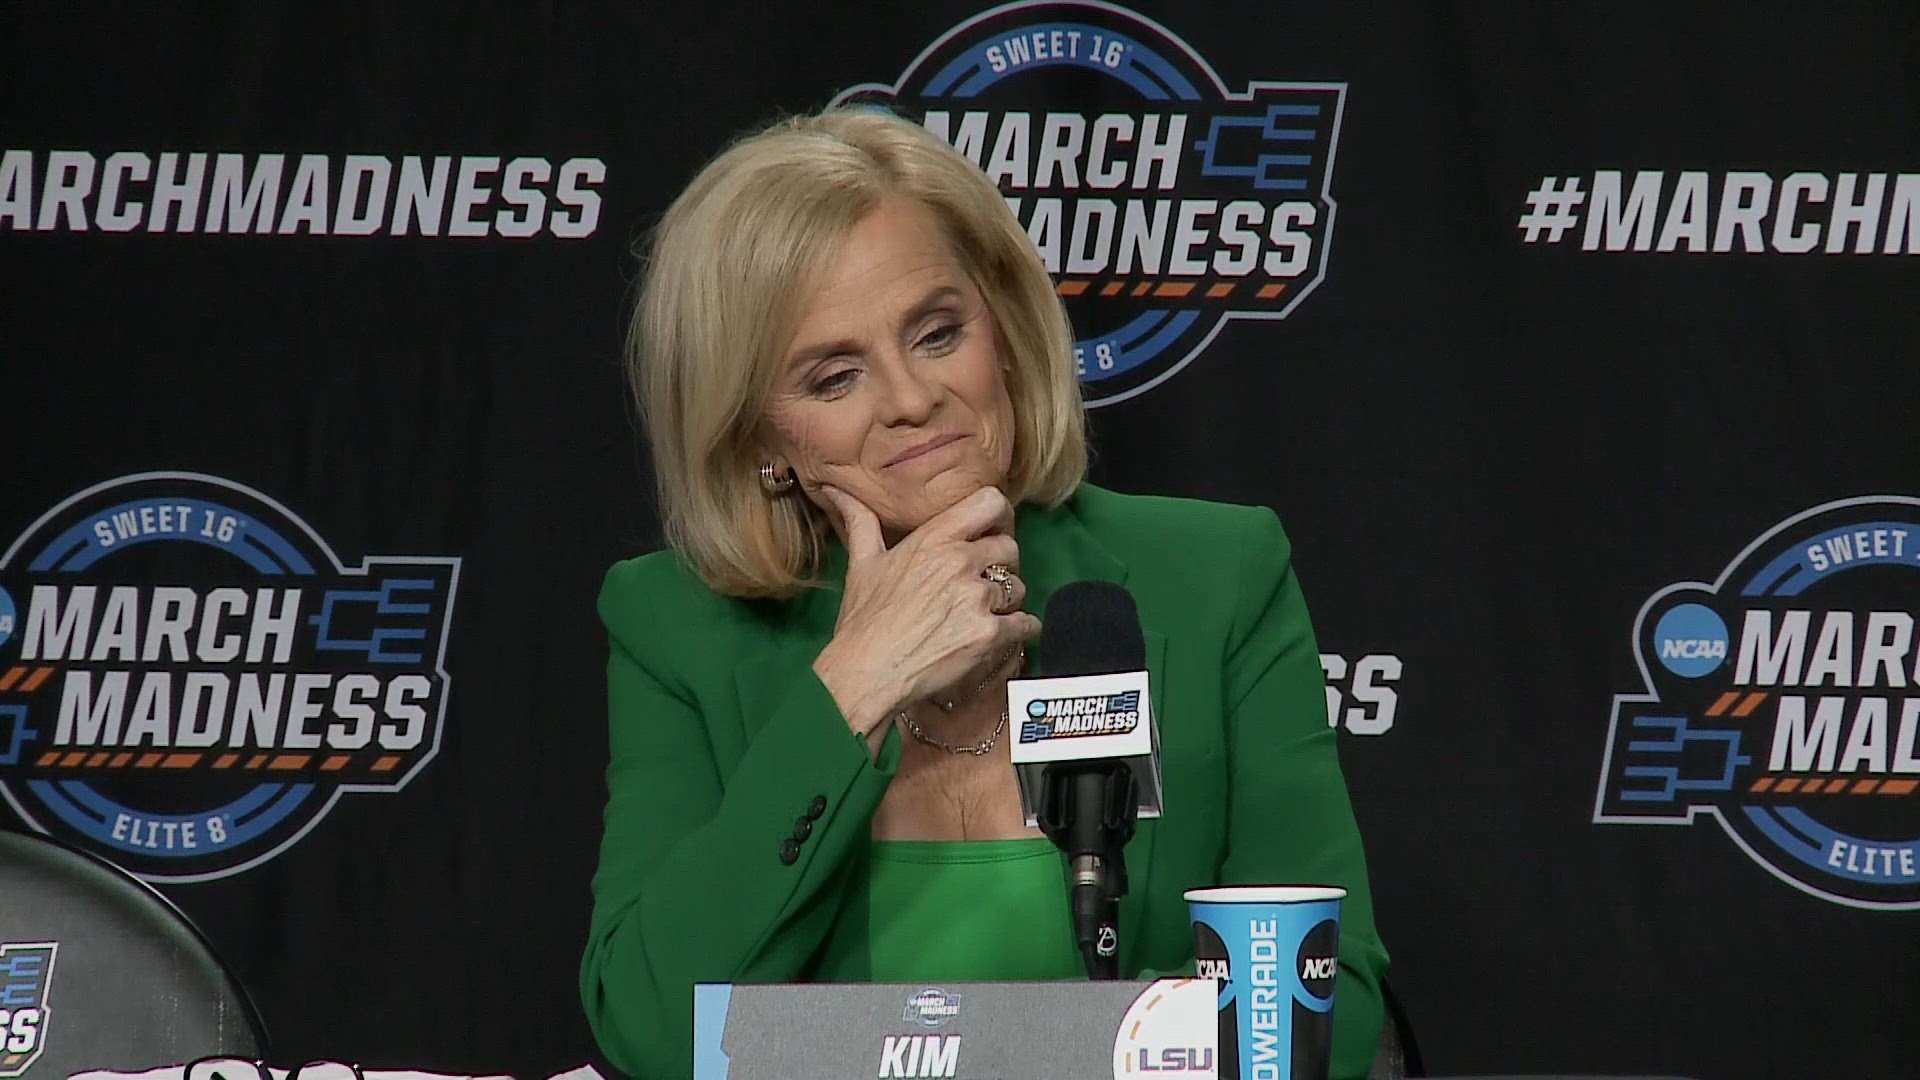 LSU head women's basketball coach Kim Mulkey talks about losing to Caitlin Clark and Iowa, her own team's success and more.